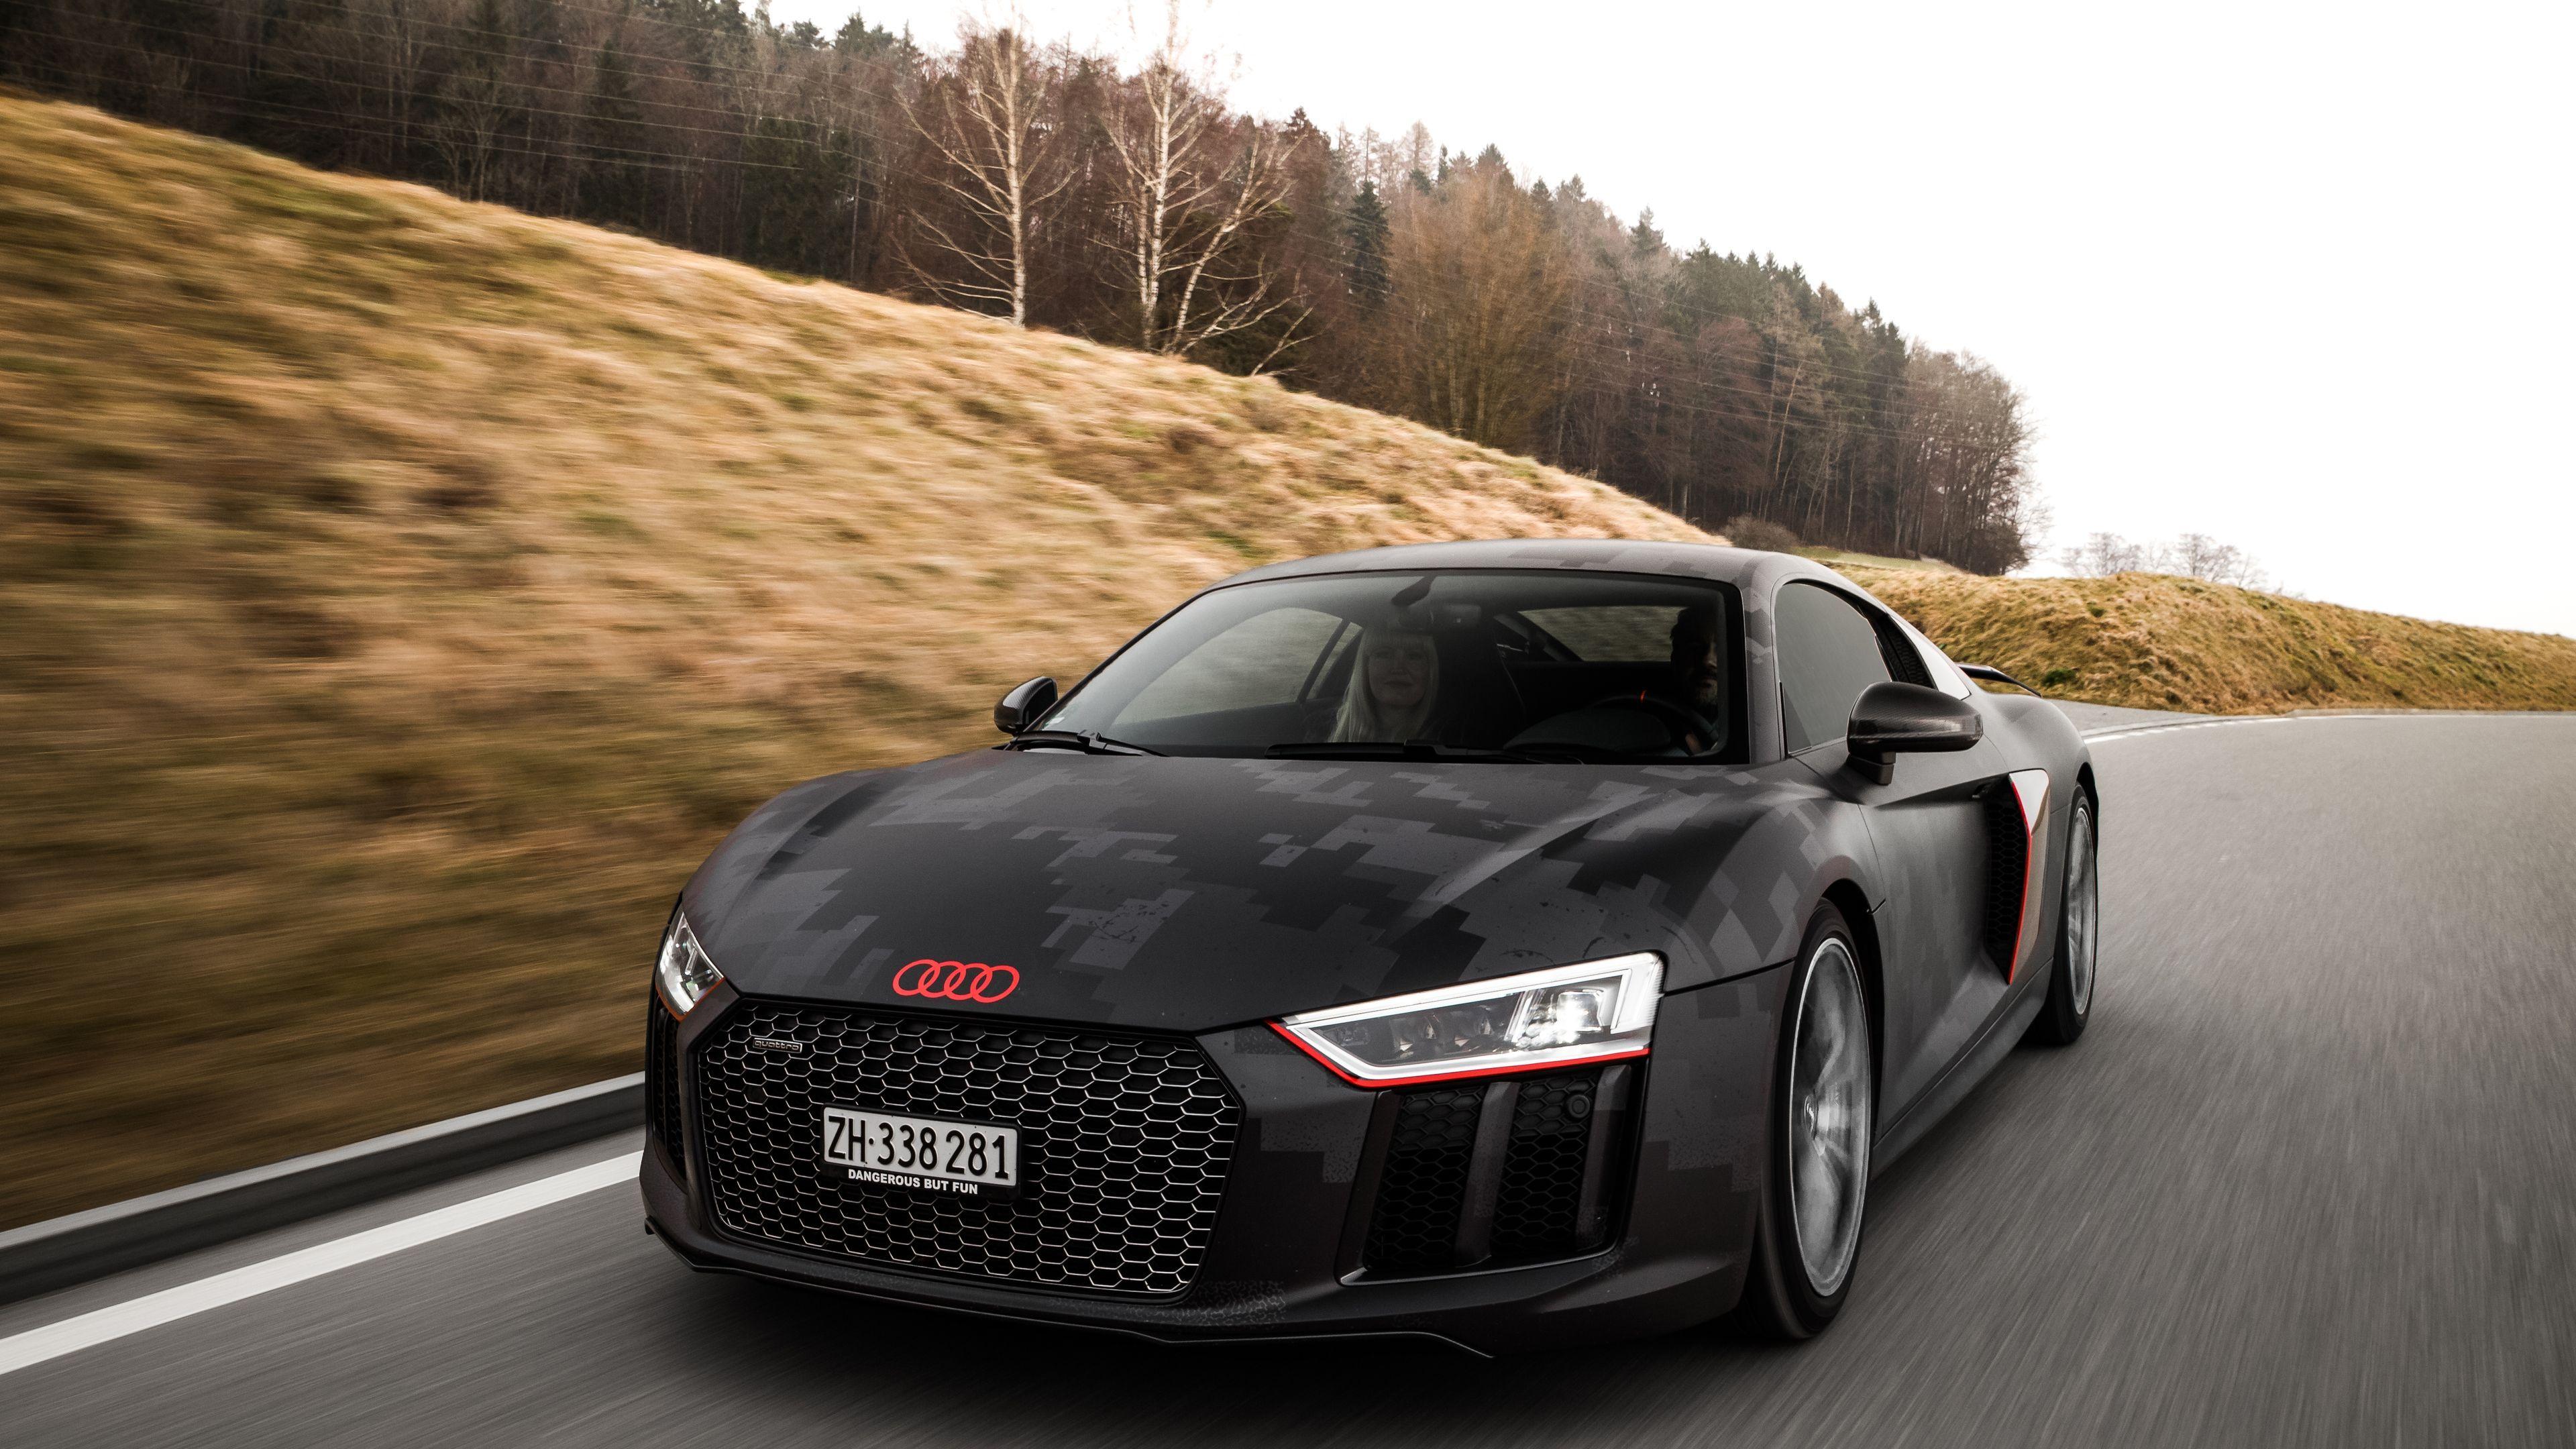 Audi R8 V10 Wallpapers Top Free Audi R8 V10 Backgrounds Wallpaperaccess